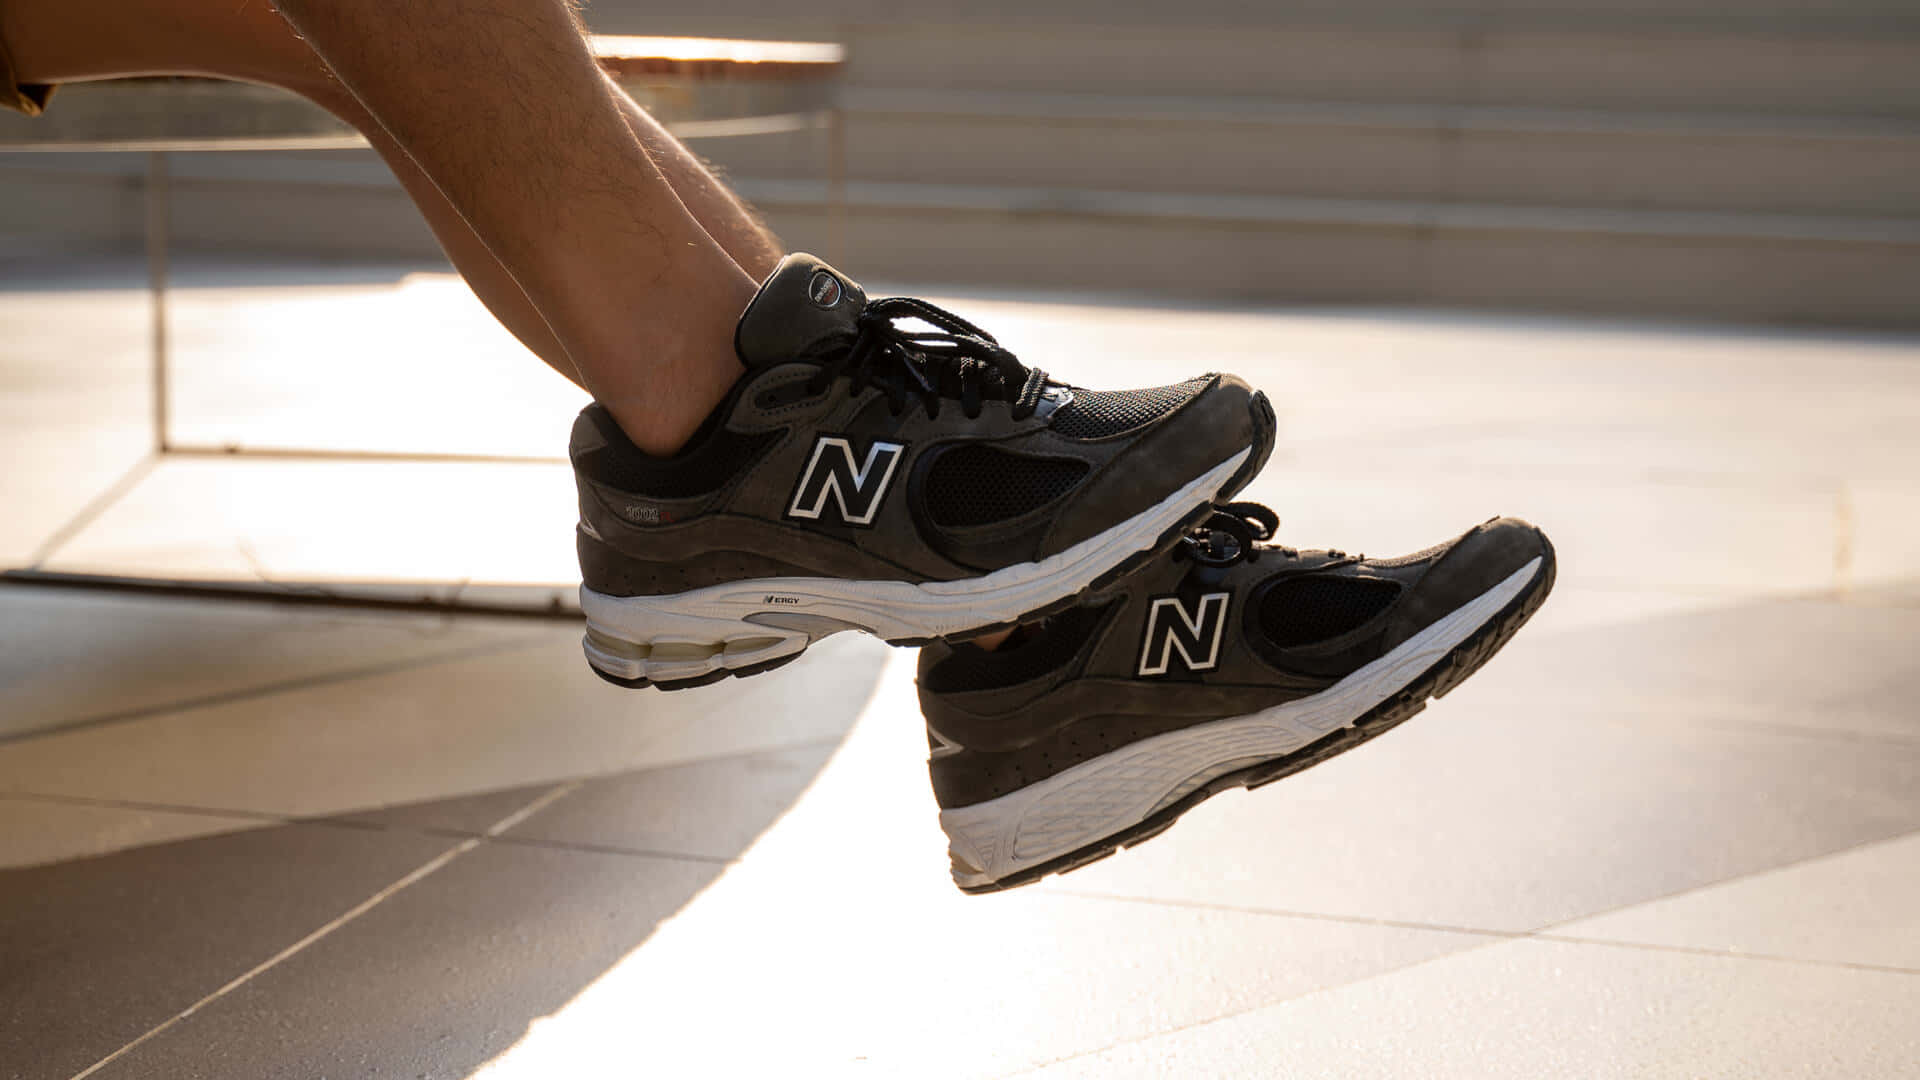 New Balance sneakers for everyday style and comfort.